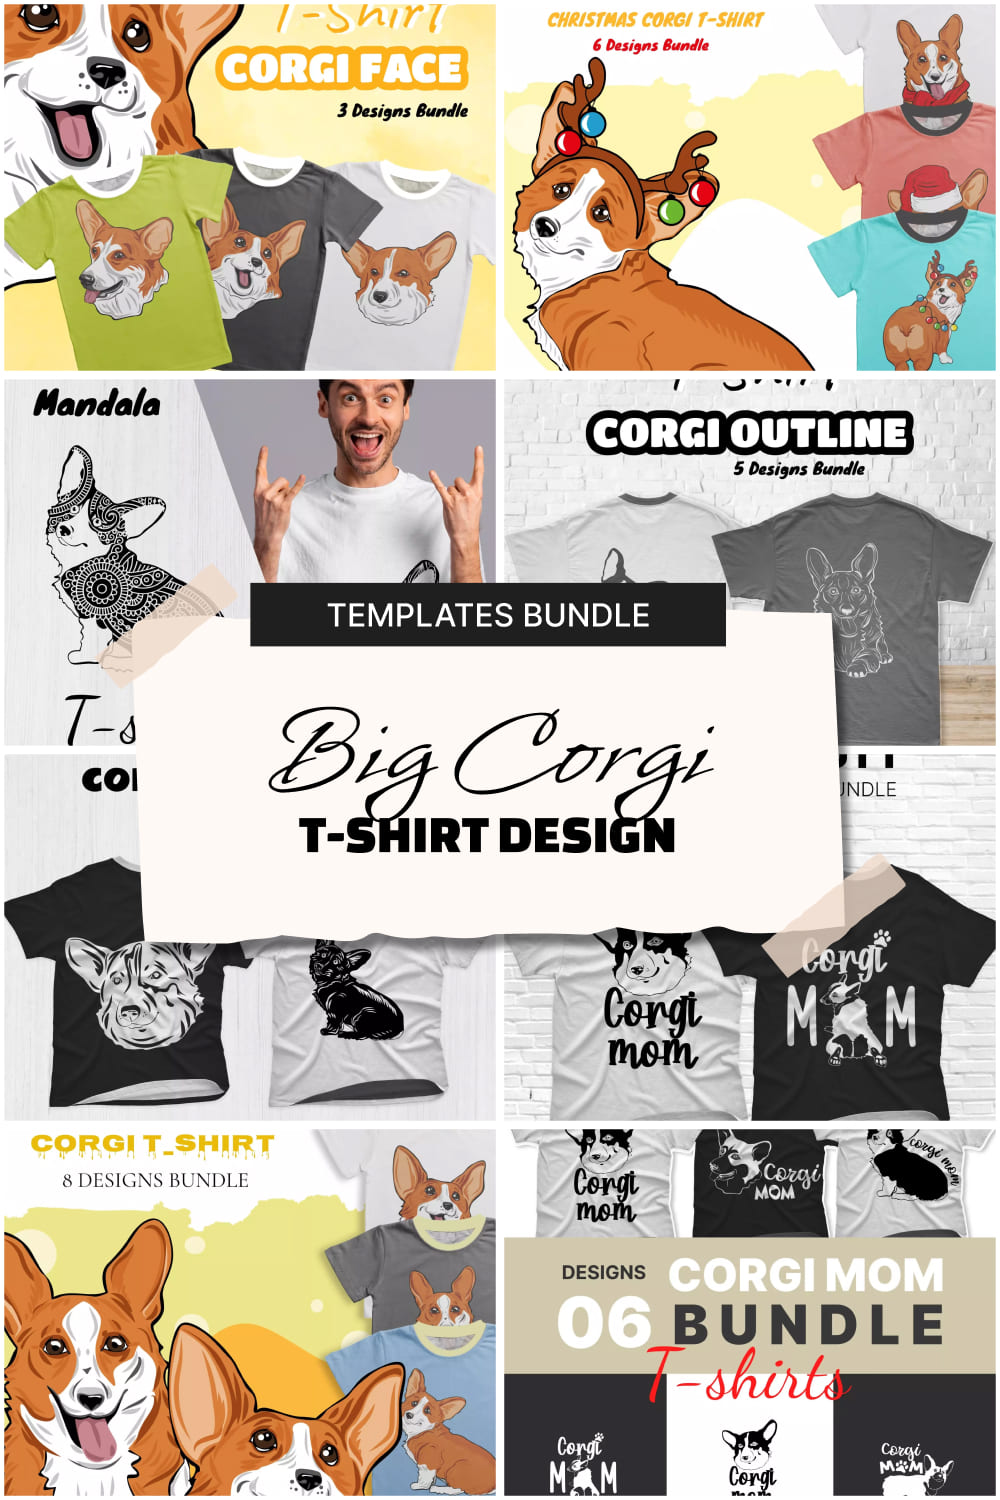 A selection of images of T-shirts with colorful corgi print.